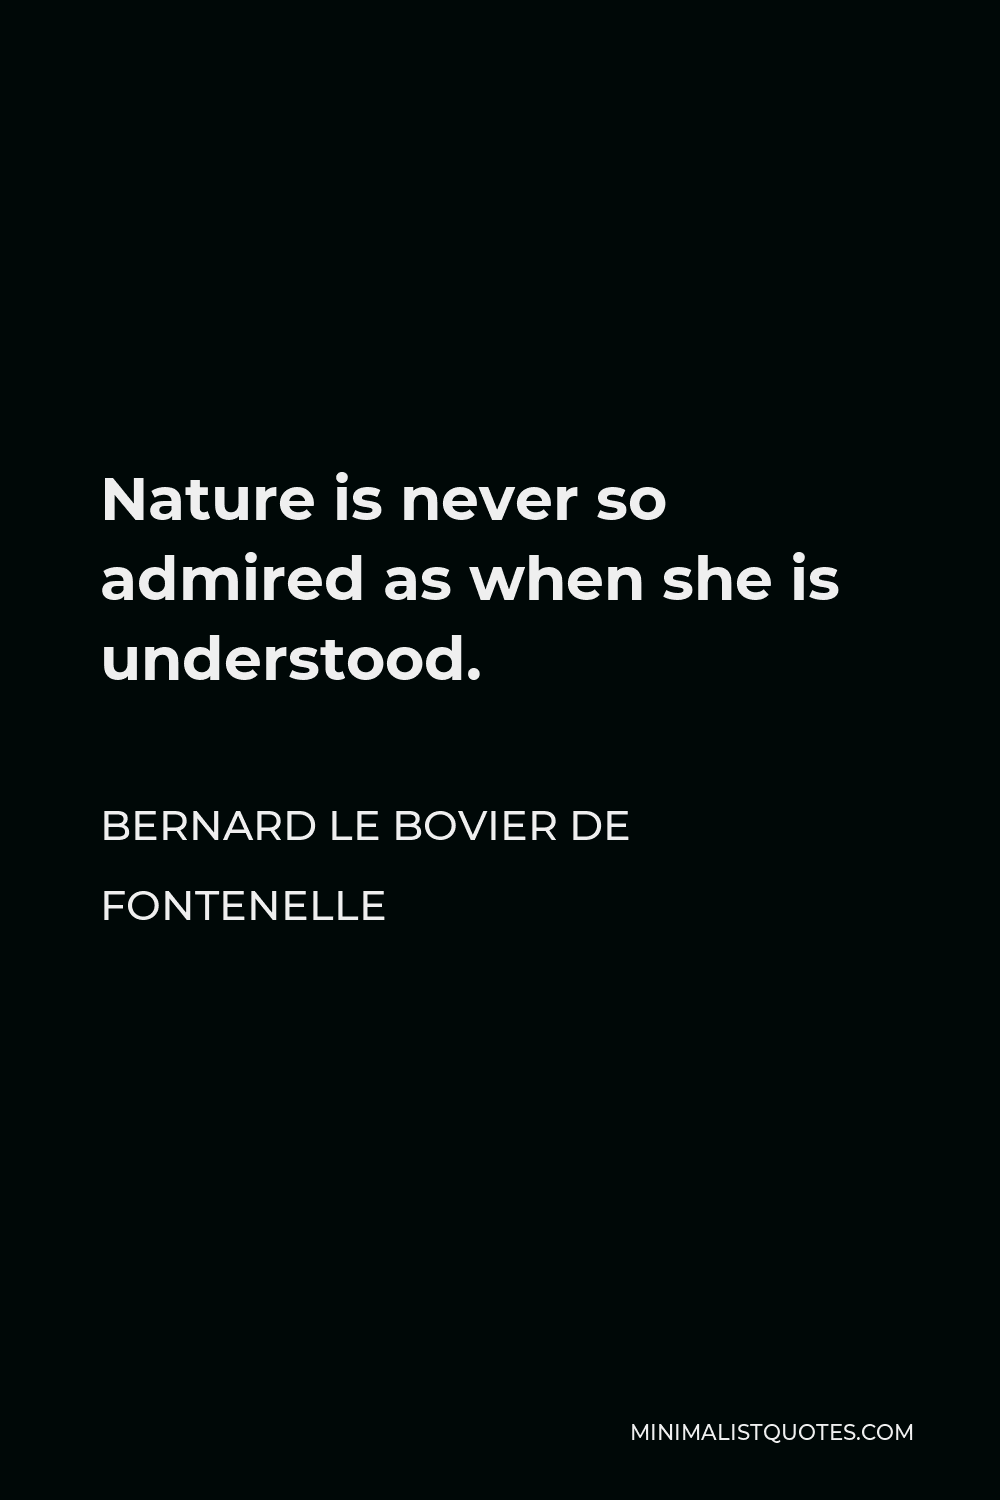 Bernard le Bovier de Fontenelle Quote - Nature is never so admired as when she is understood.